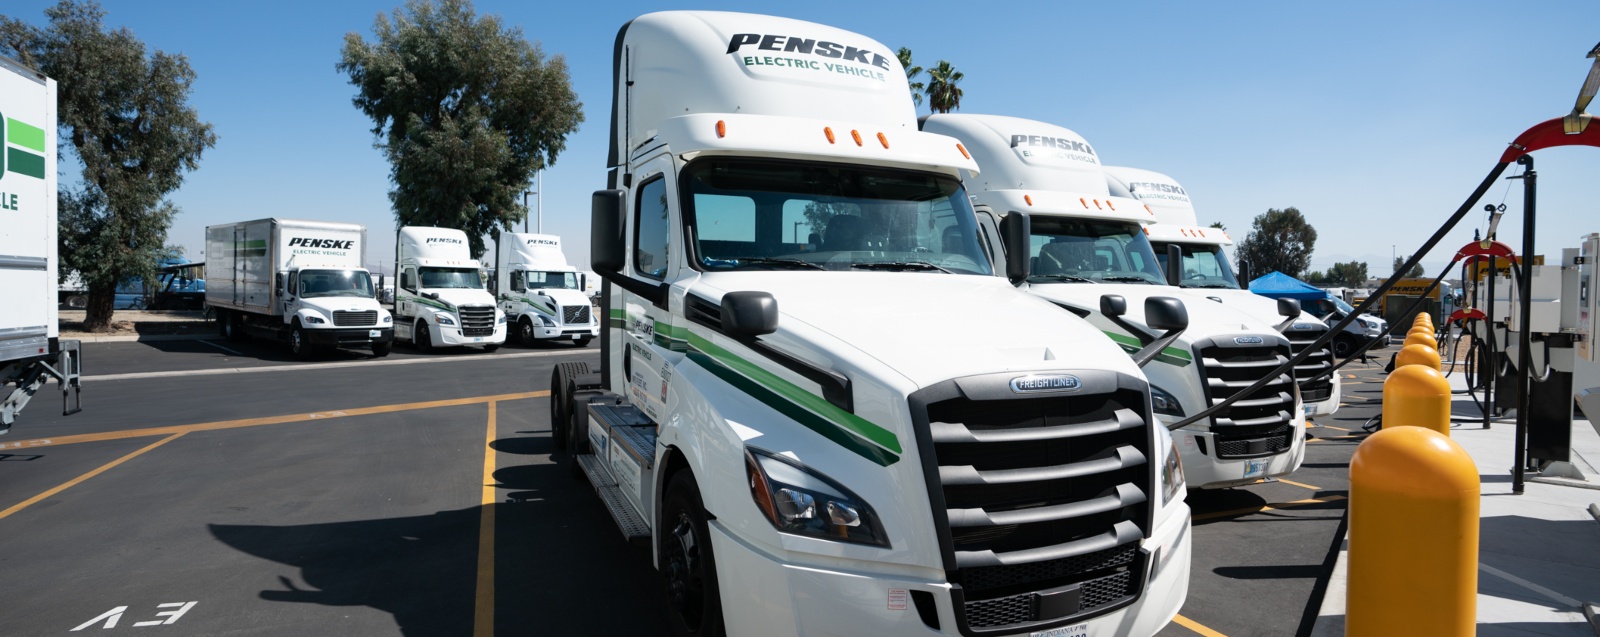 Penske and Hitachi Make Sustainable Mobility a Reality With Smart EV Charging Infrastructure